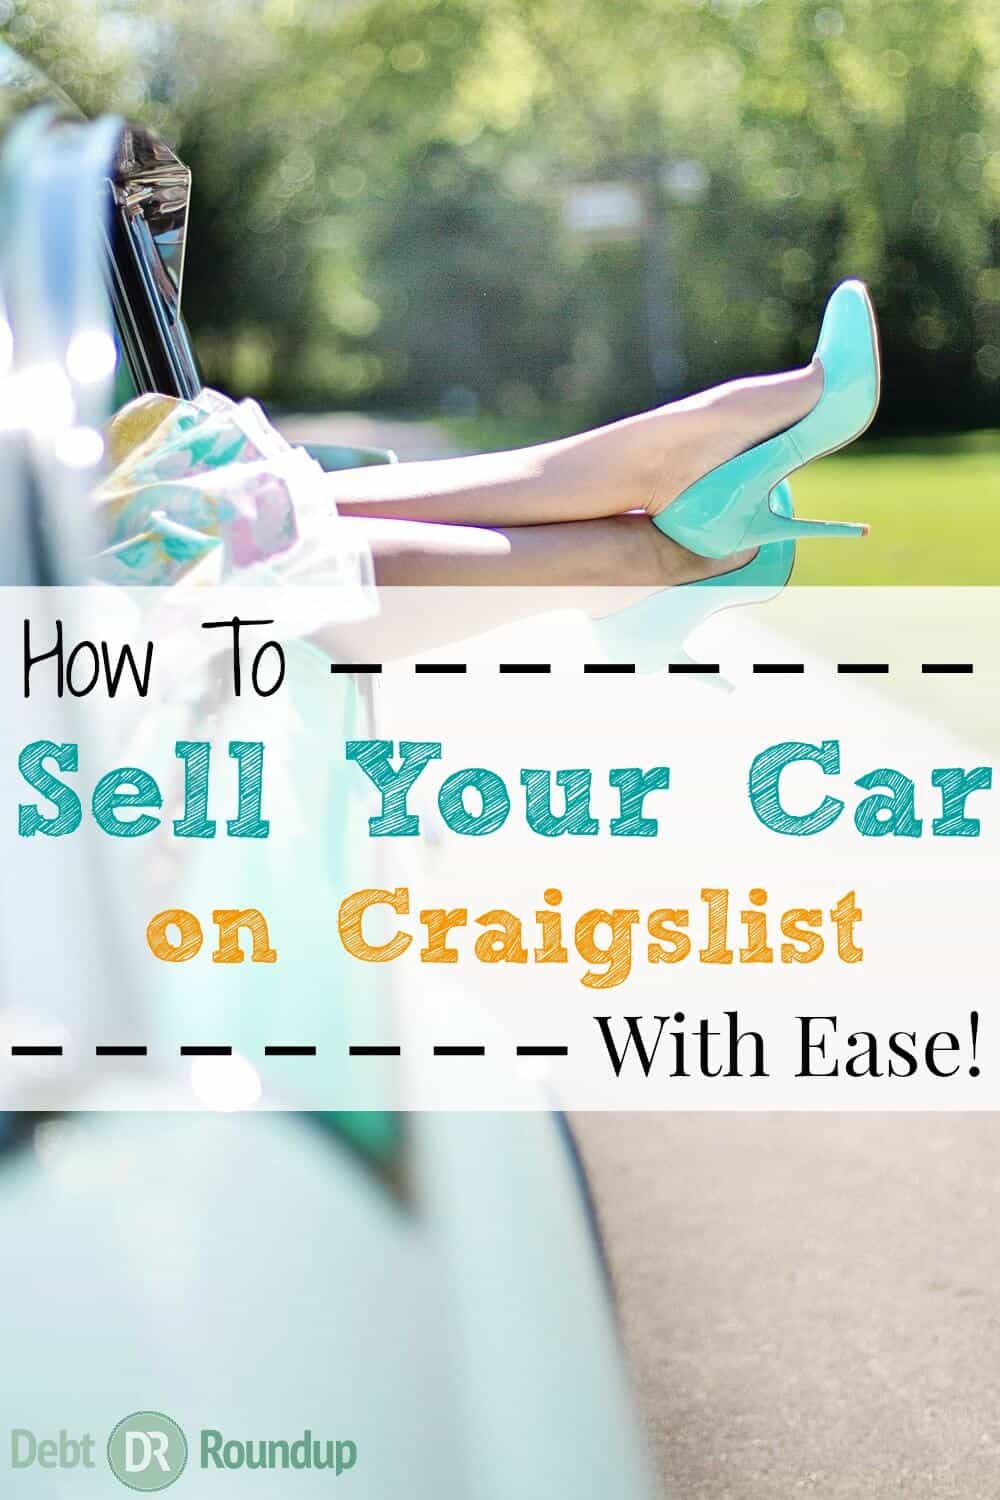 How to Sell Your Car on Craigslist Quickly and Safely